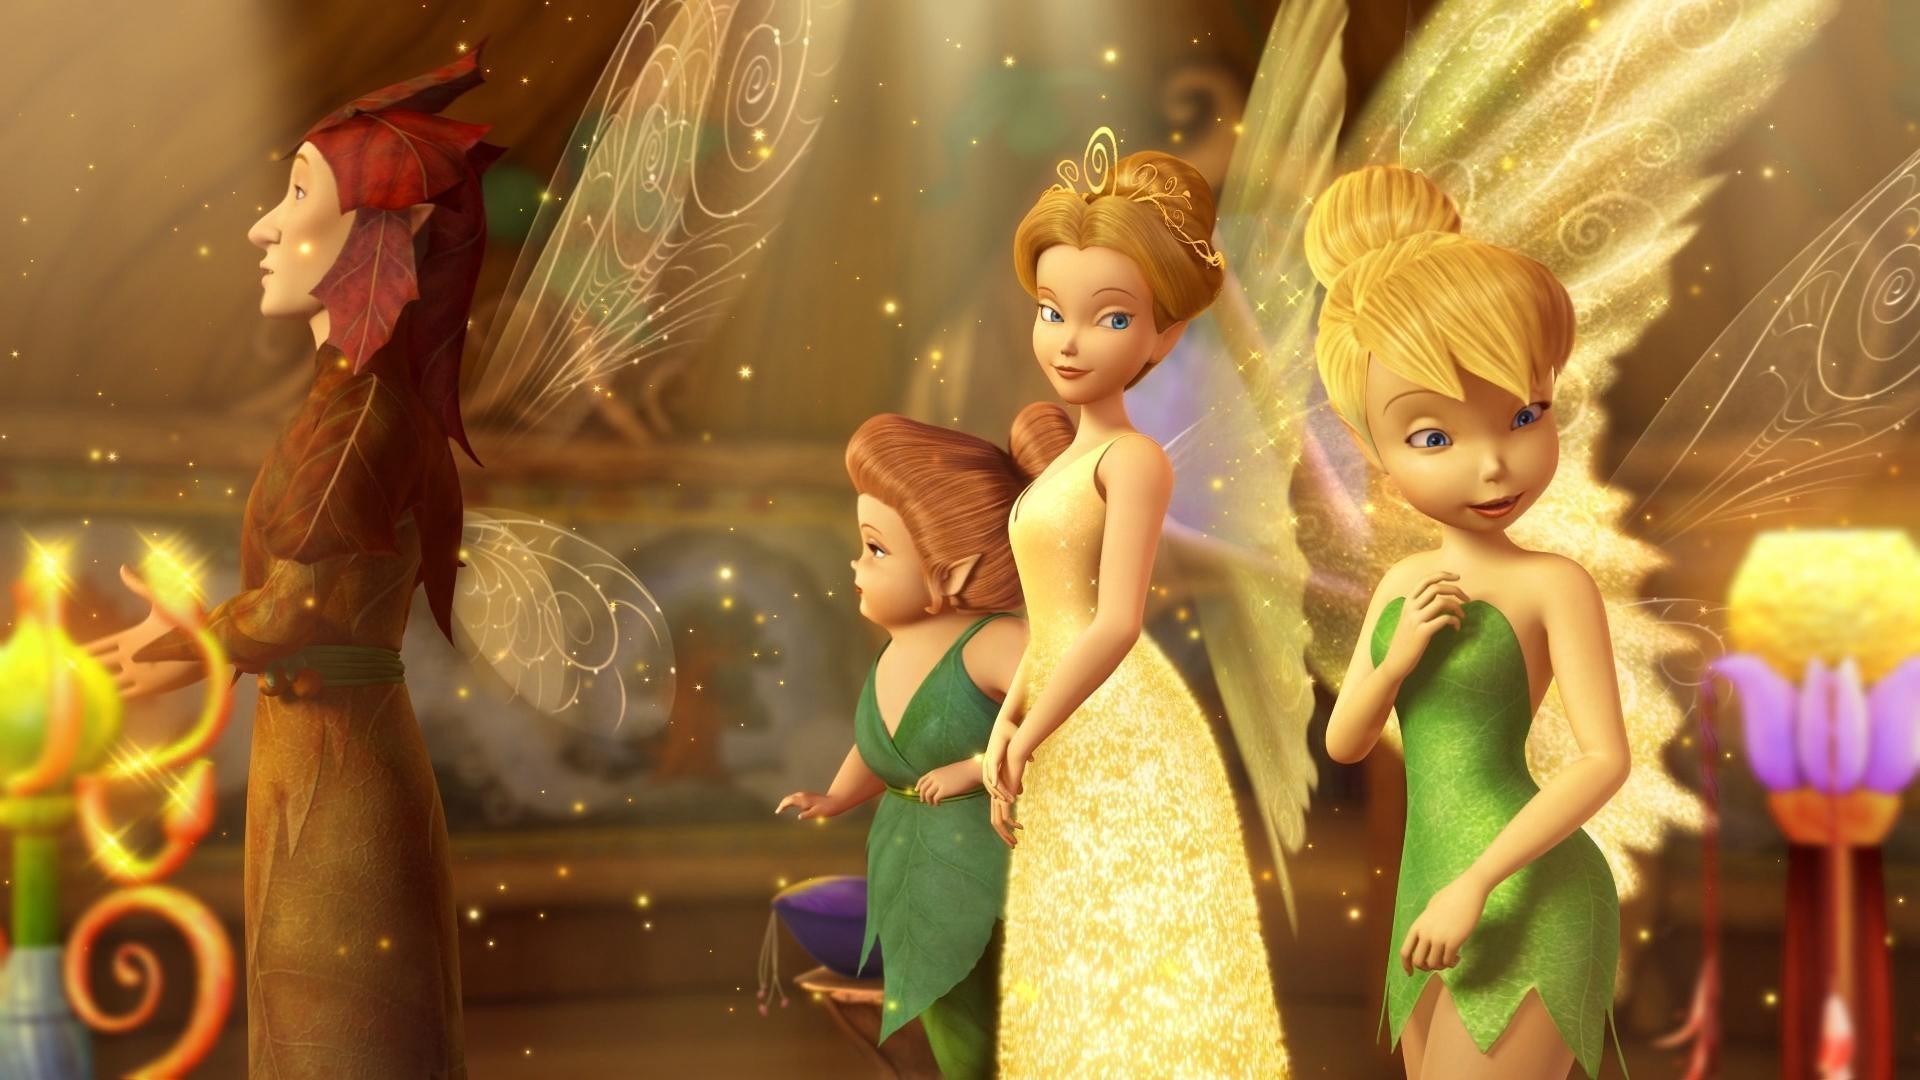 1920x1080 Tinker Bell and the Lost Treasure Wallpaper 2